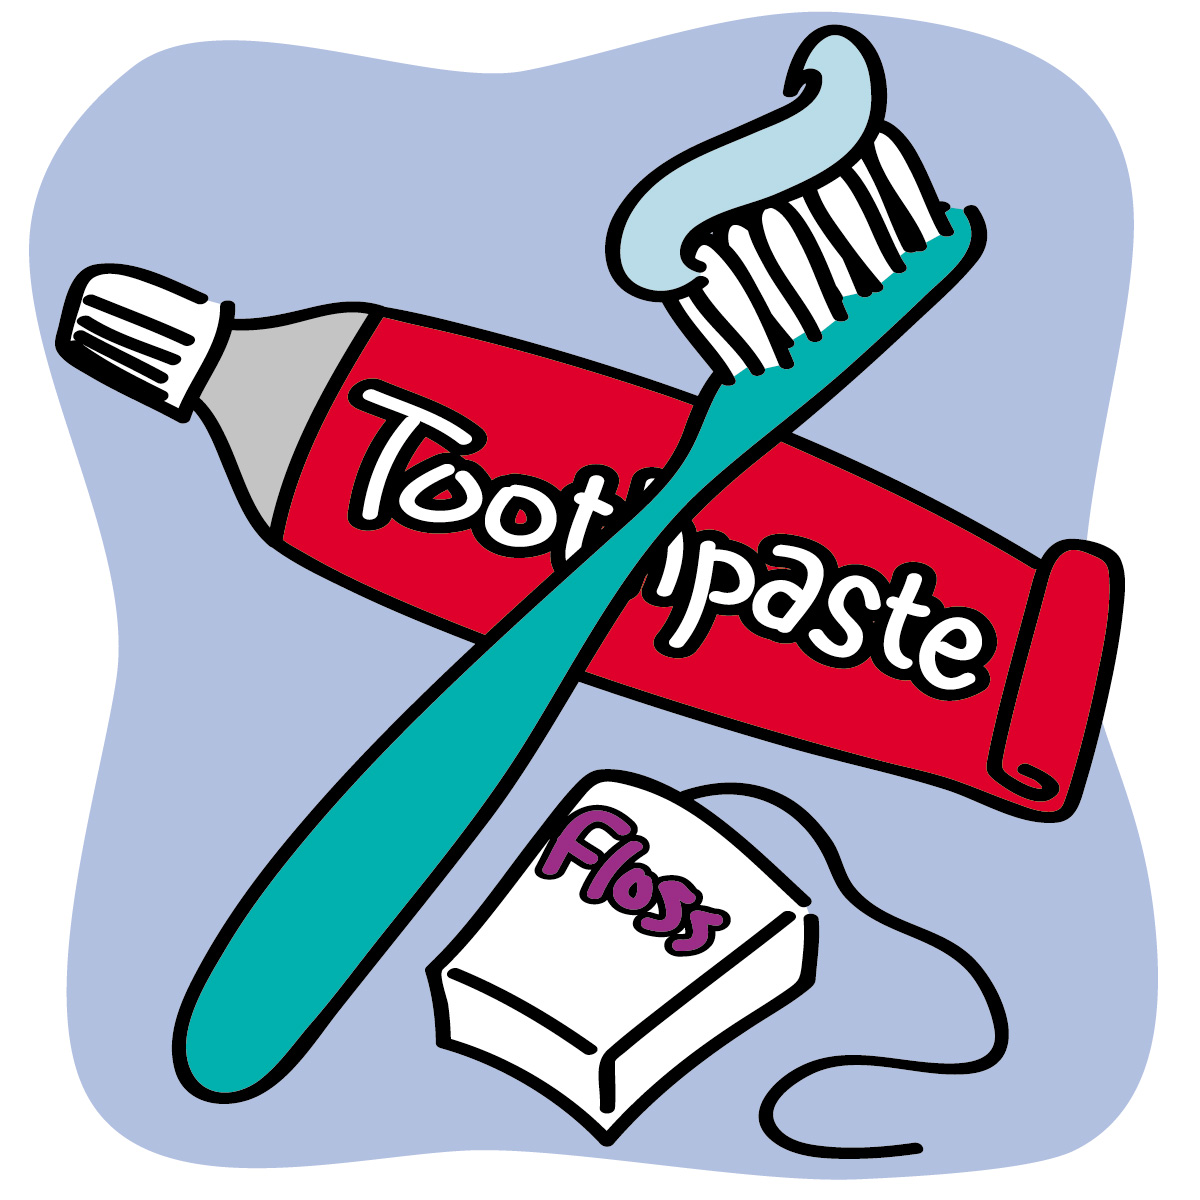 Dentist clipart free images 7